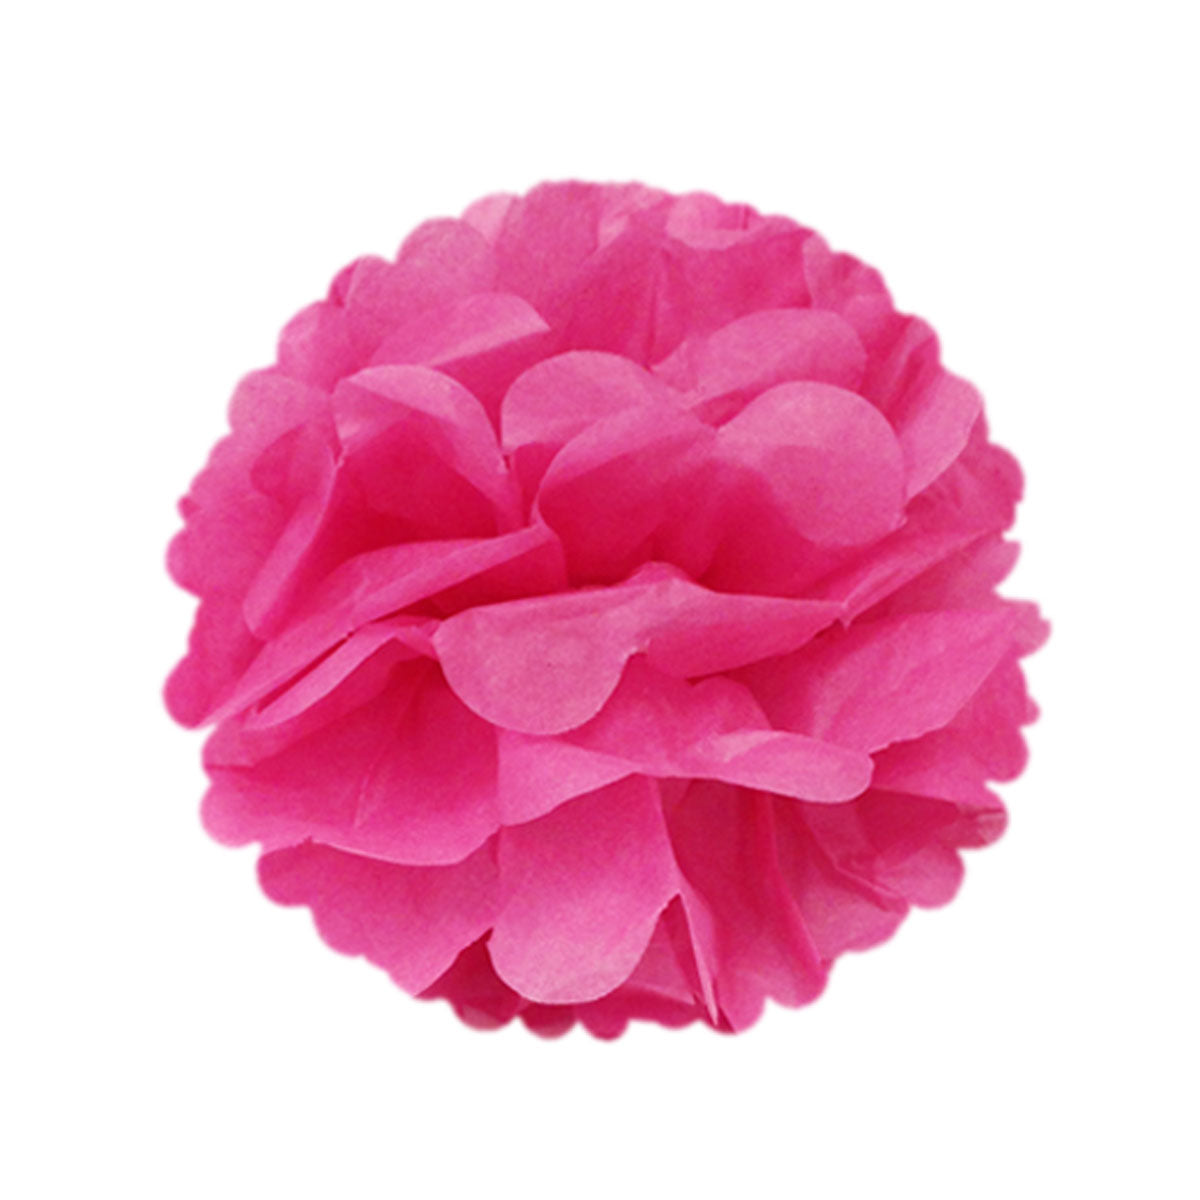 Wrapables 8 inch Set of 5 Tissue Pom Poms Party Decorations for Weddings, Birthday Parties Baby Showers and Nursery Dcor, Hot Pink